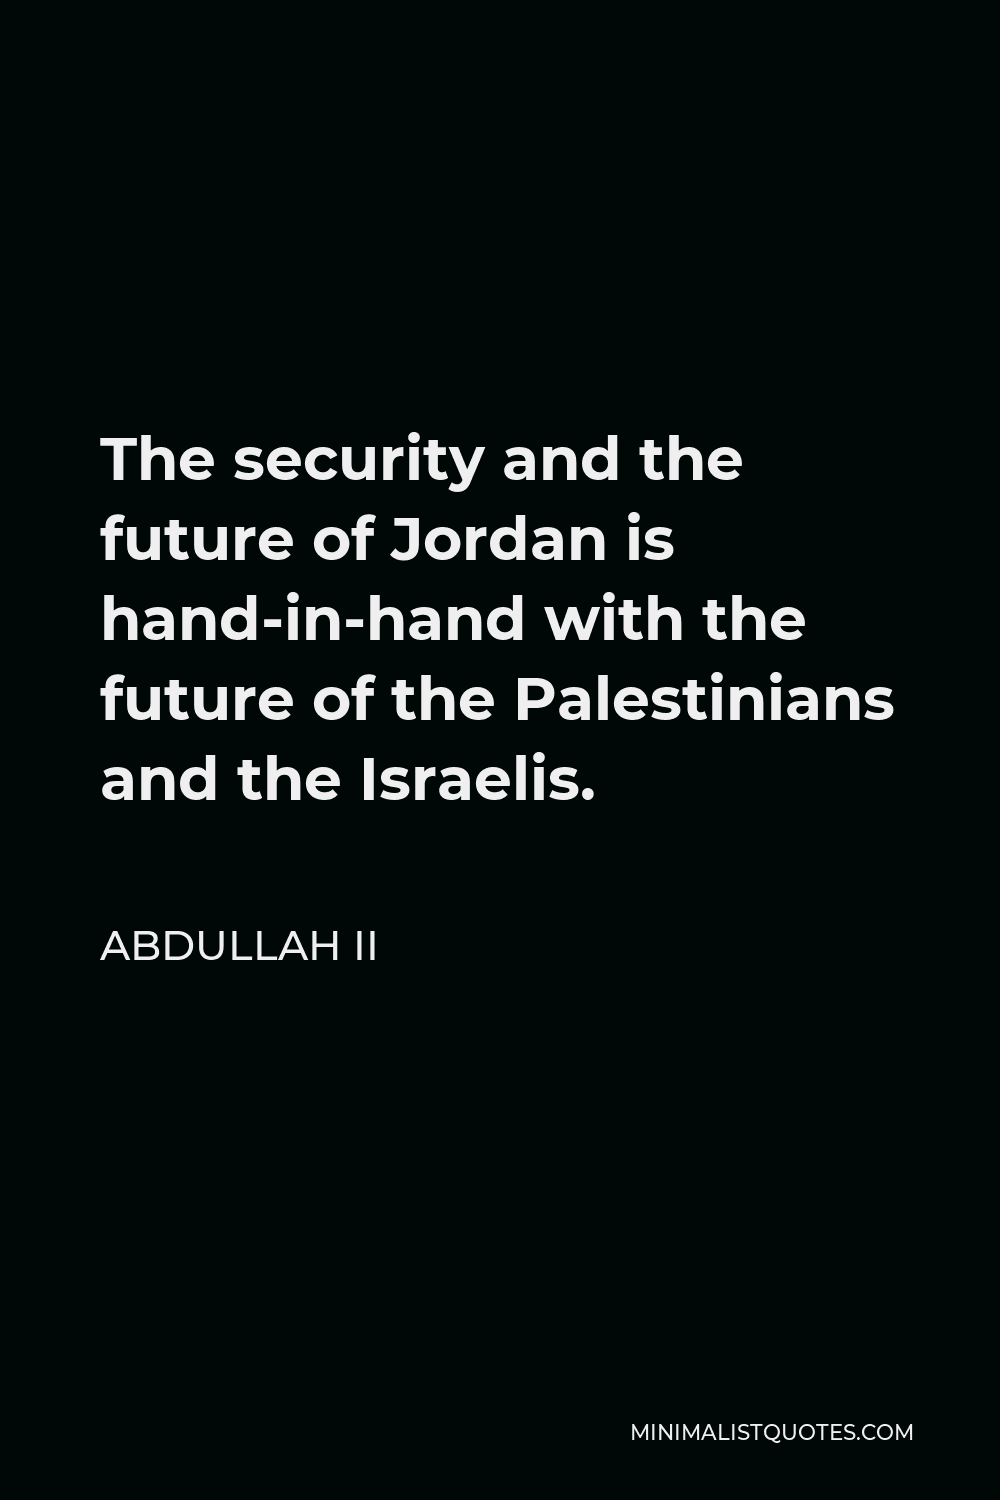 Abdullah II Quote - The security and the future of Jordan is hand-in-hand with the future of the Palestinians and the Israelis.